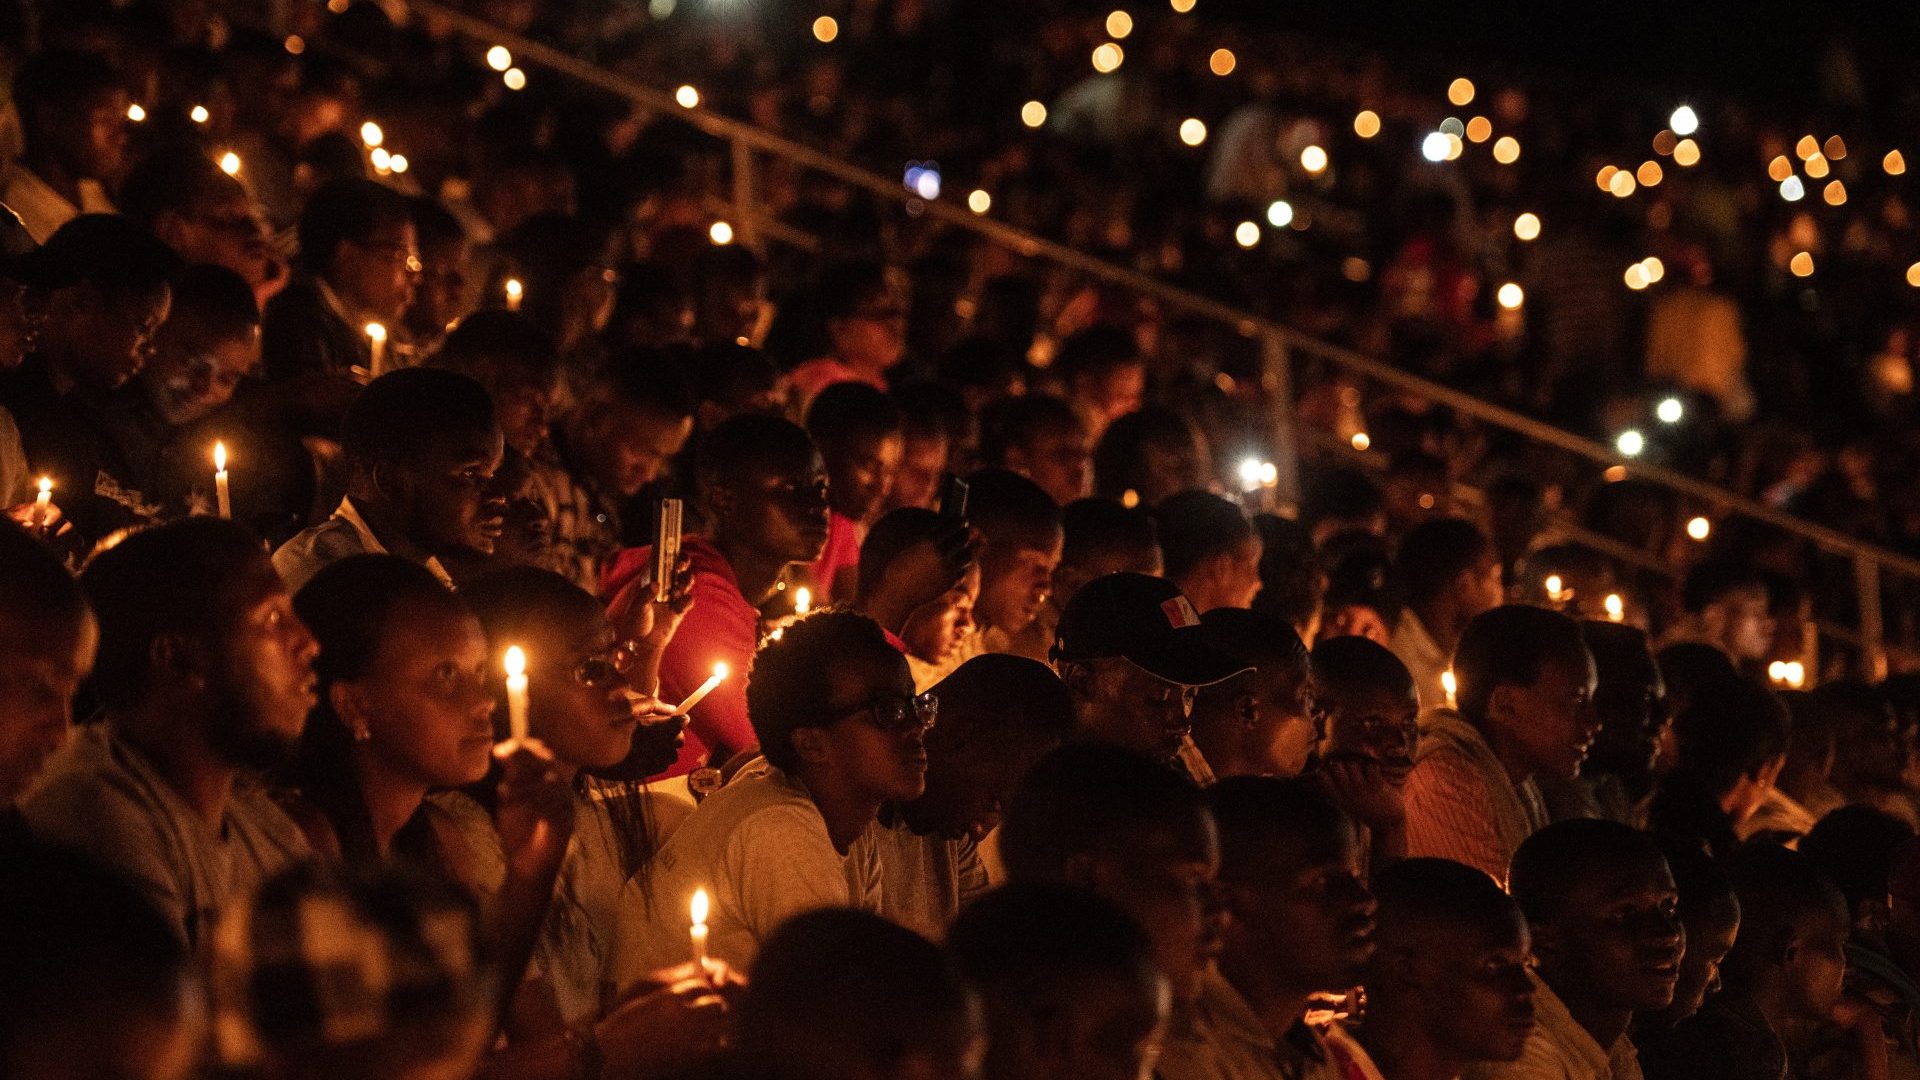 People hold candles during a commemoration ceremony of the 1994 genocide on April 07, 2019 at Amahoro Stadium in Kigali, Rwanda. Photo: Andrew Renneisen/Getty Images